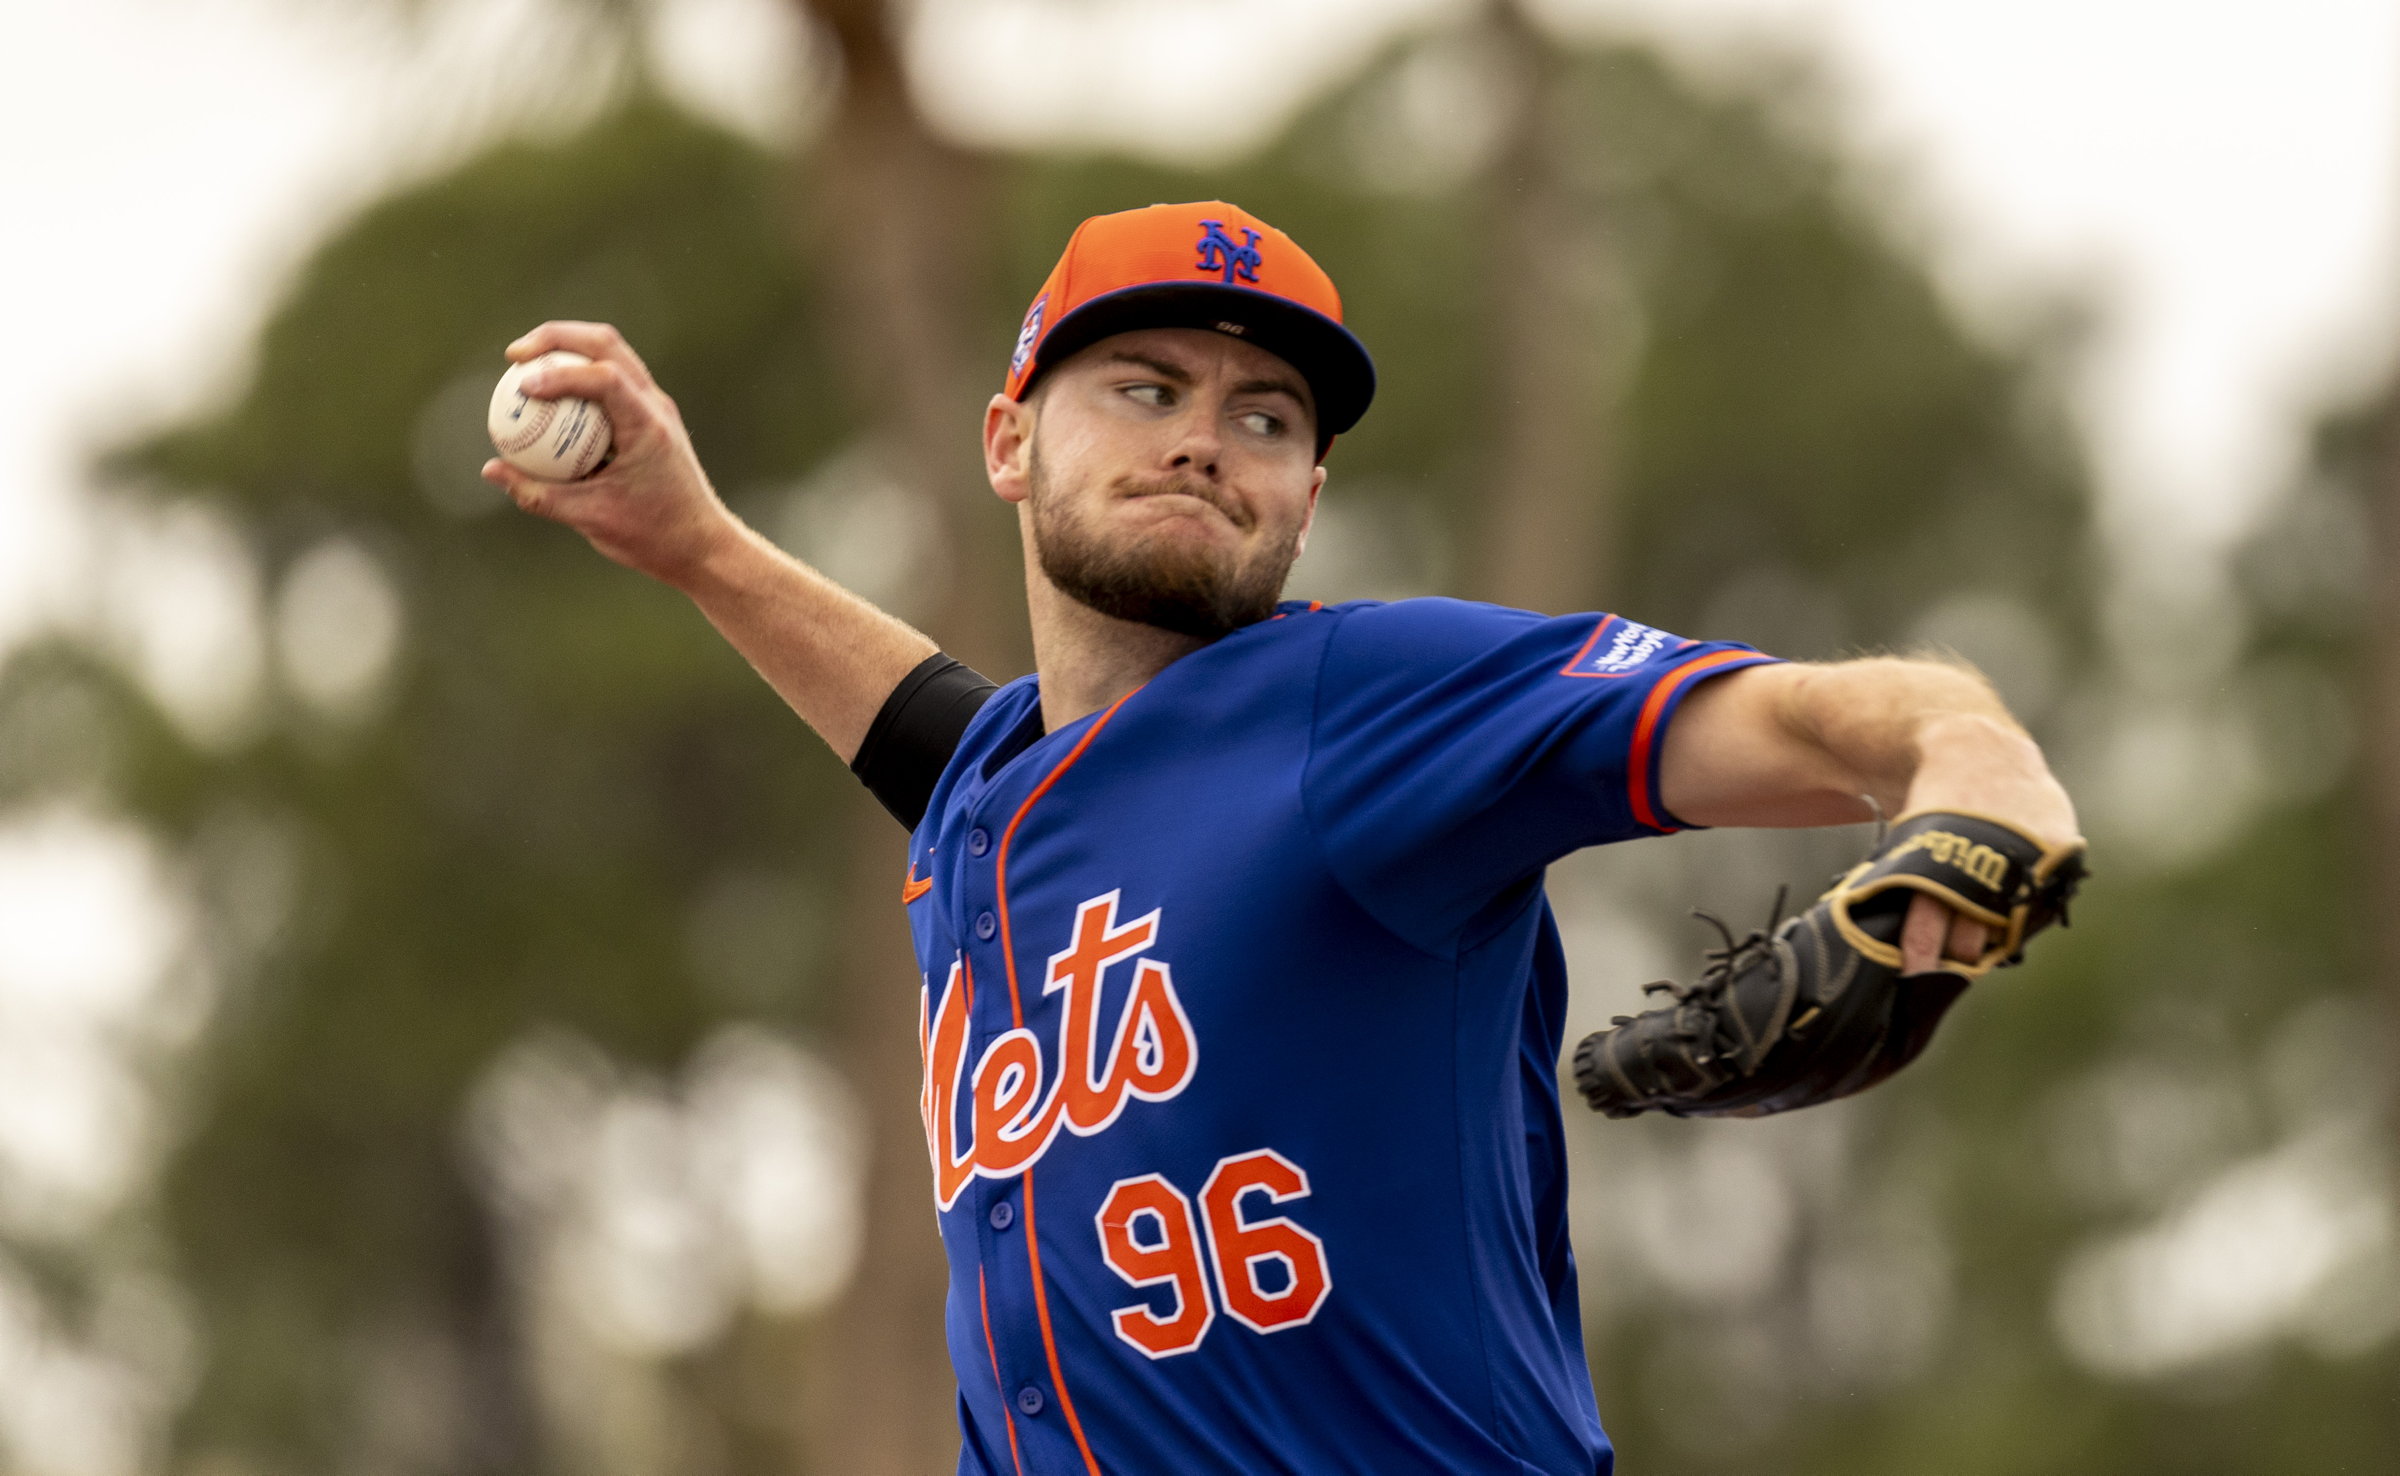 New York Mets pitcher Christian Scott throws during spring training camp in Port St. Lucie, Fl.